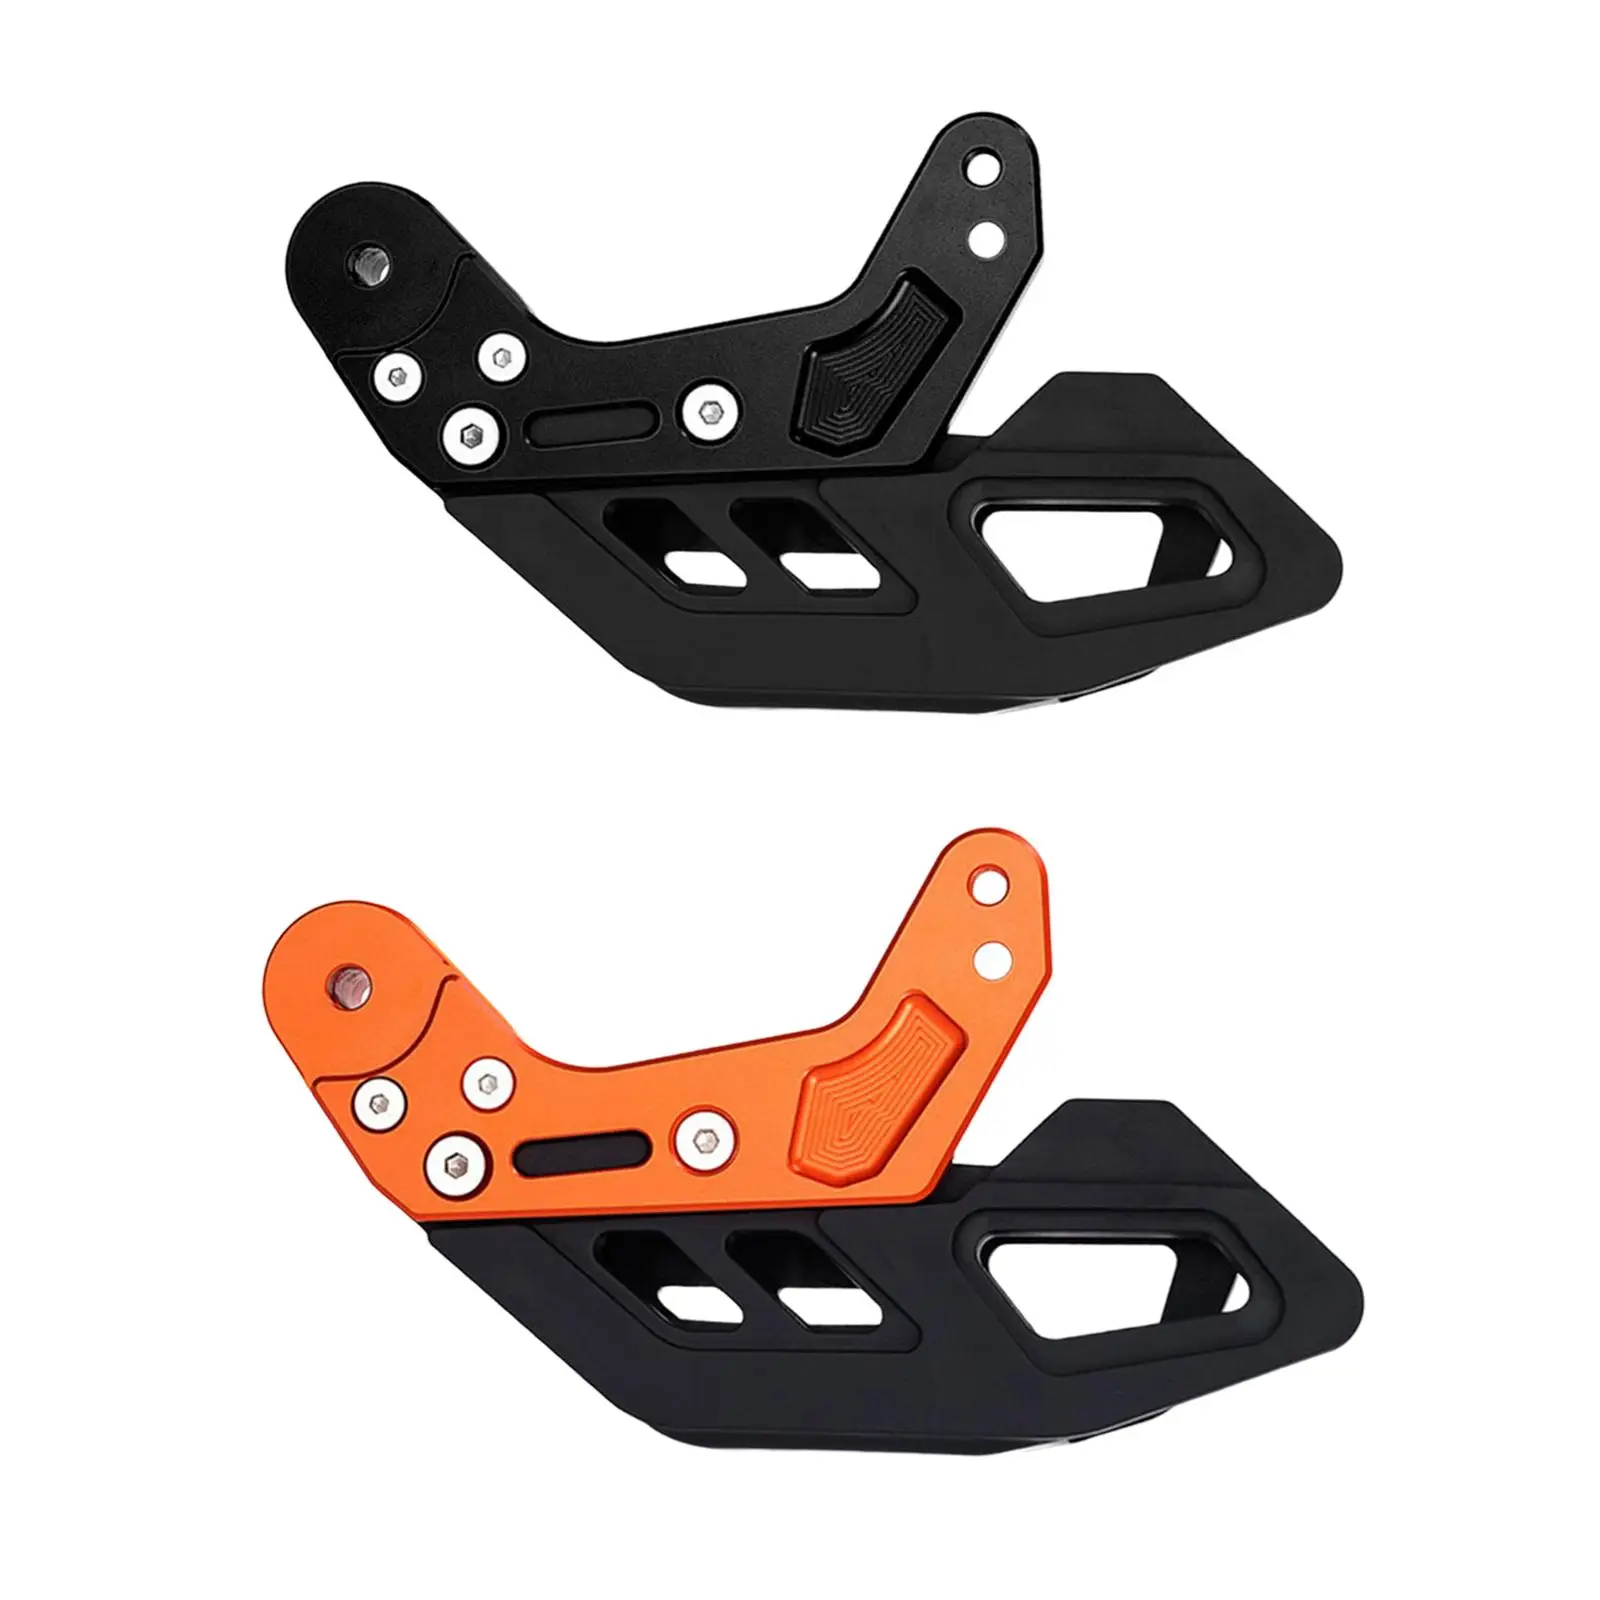 Motorcycle Chain Guide Guard Fits for 125 200 250 300 350 400 500 Exc ESX Sxf XC Xcww